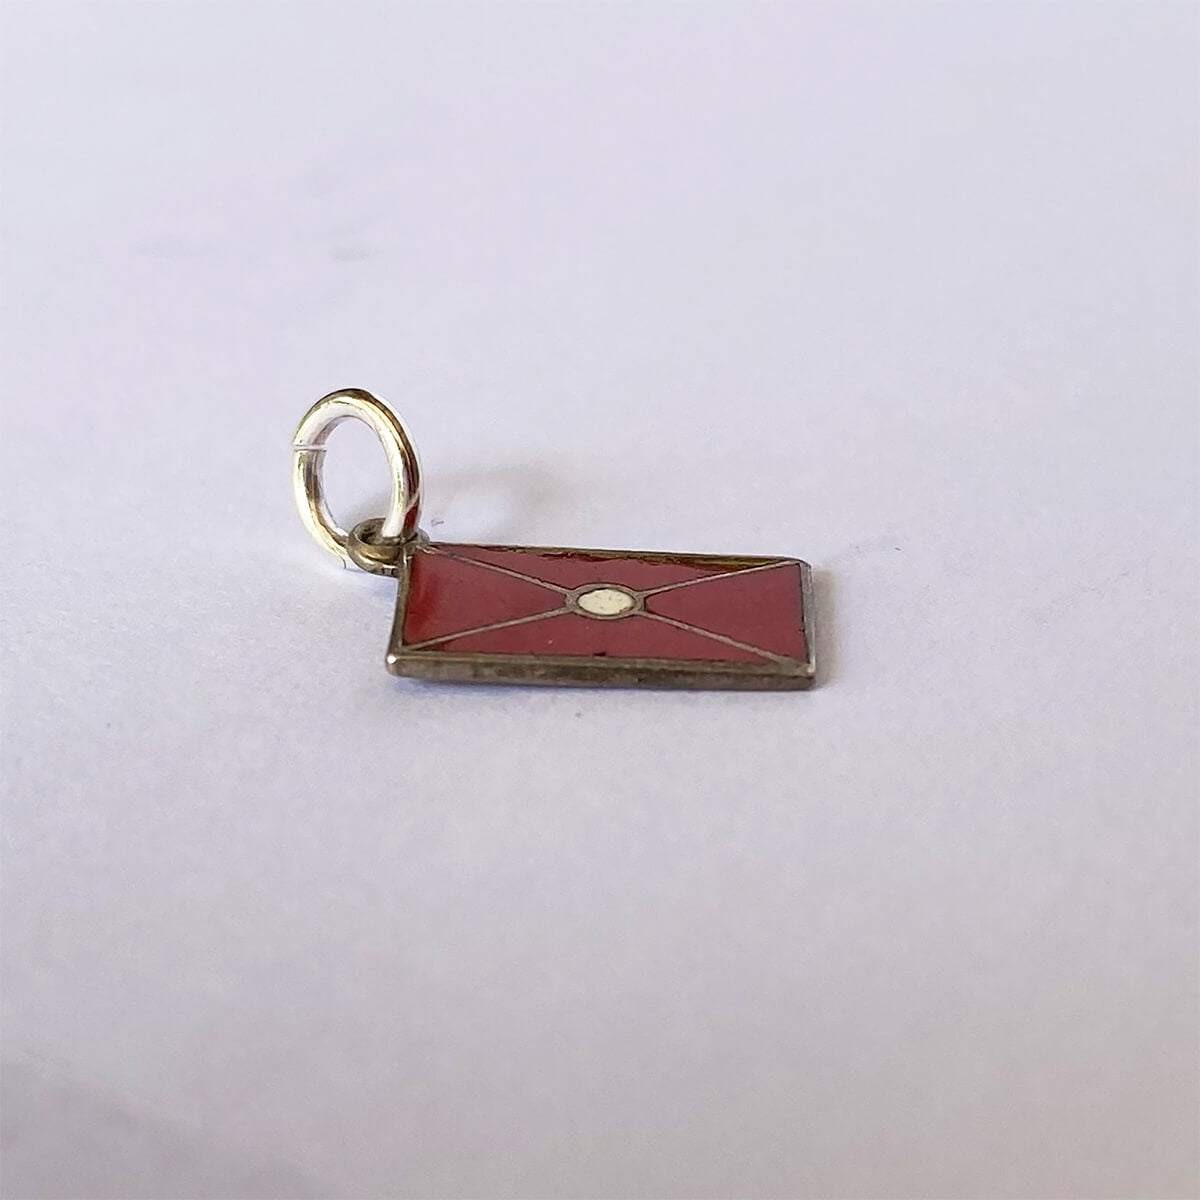 Silver and red enamel vintage envelope charm from Charmarama